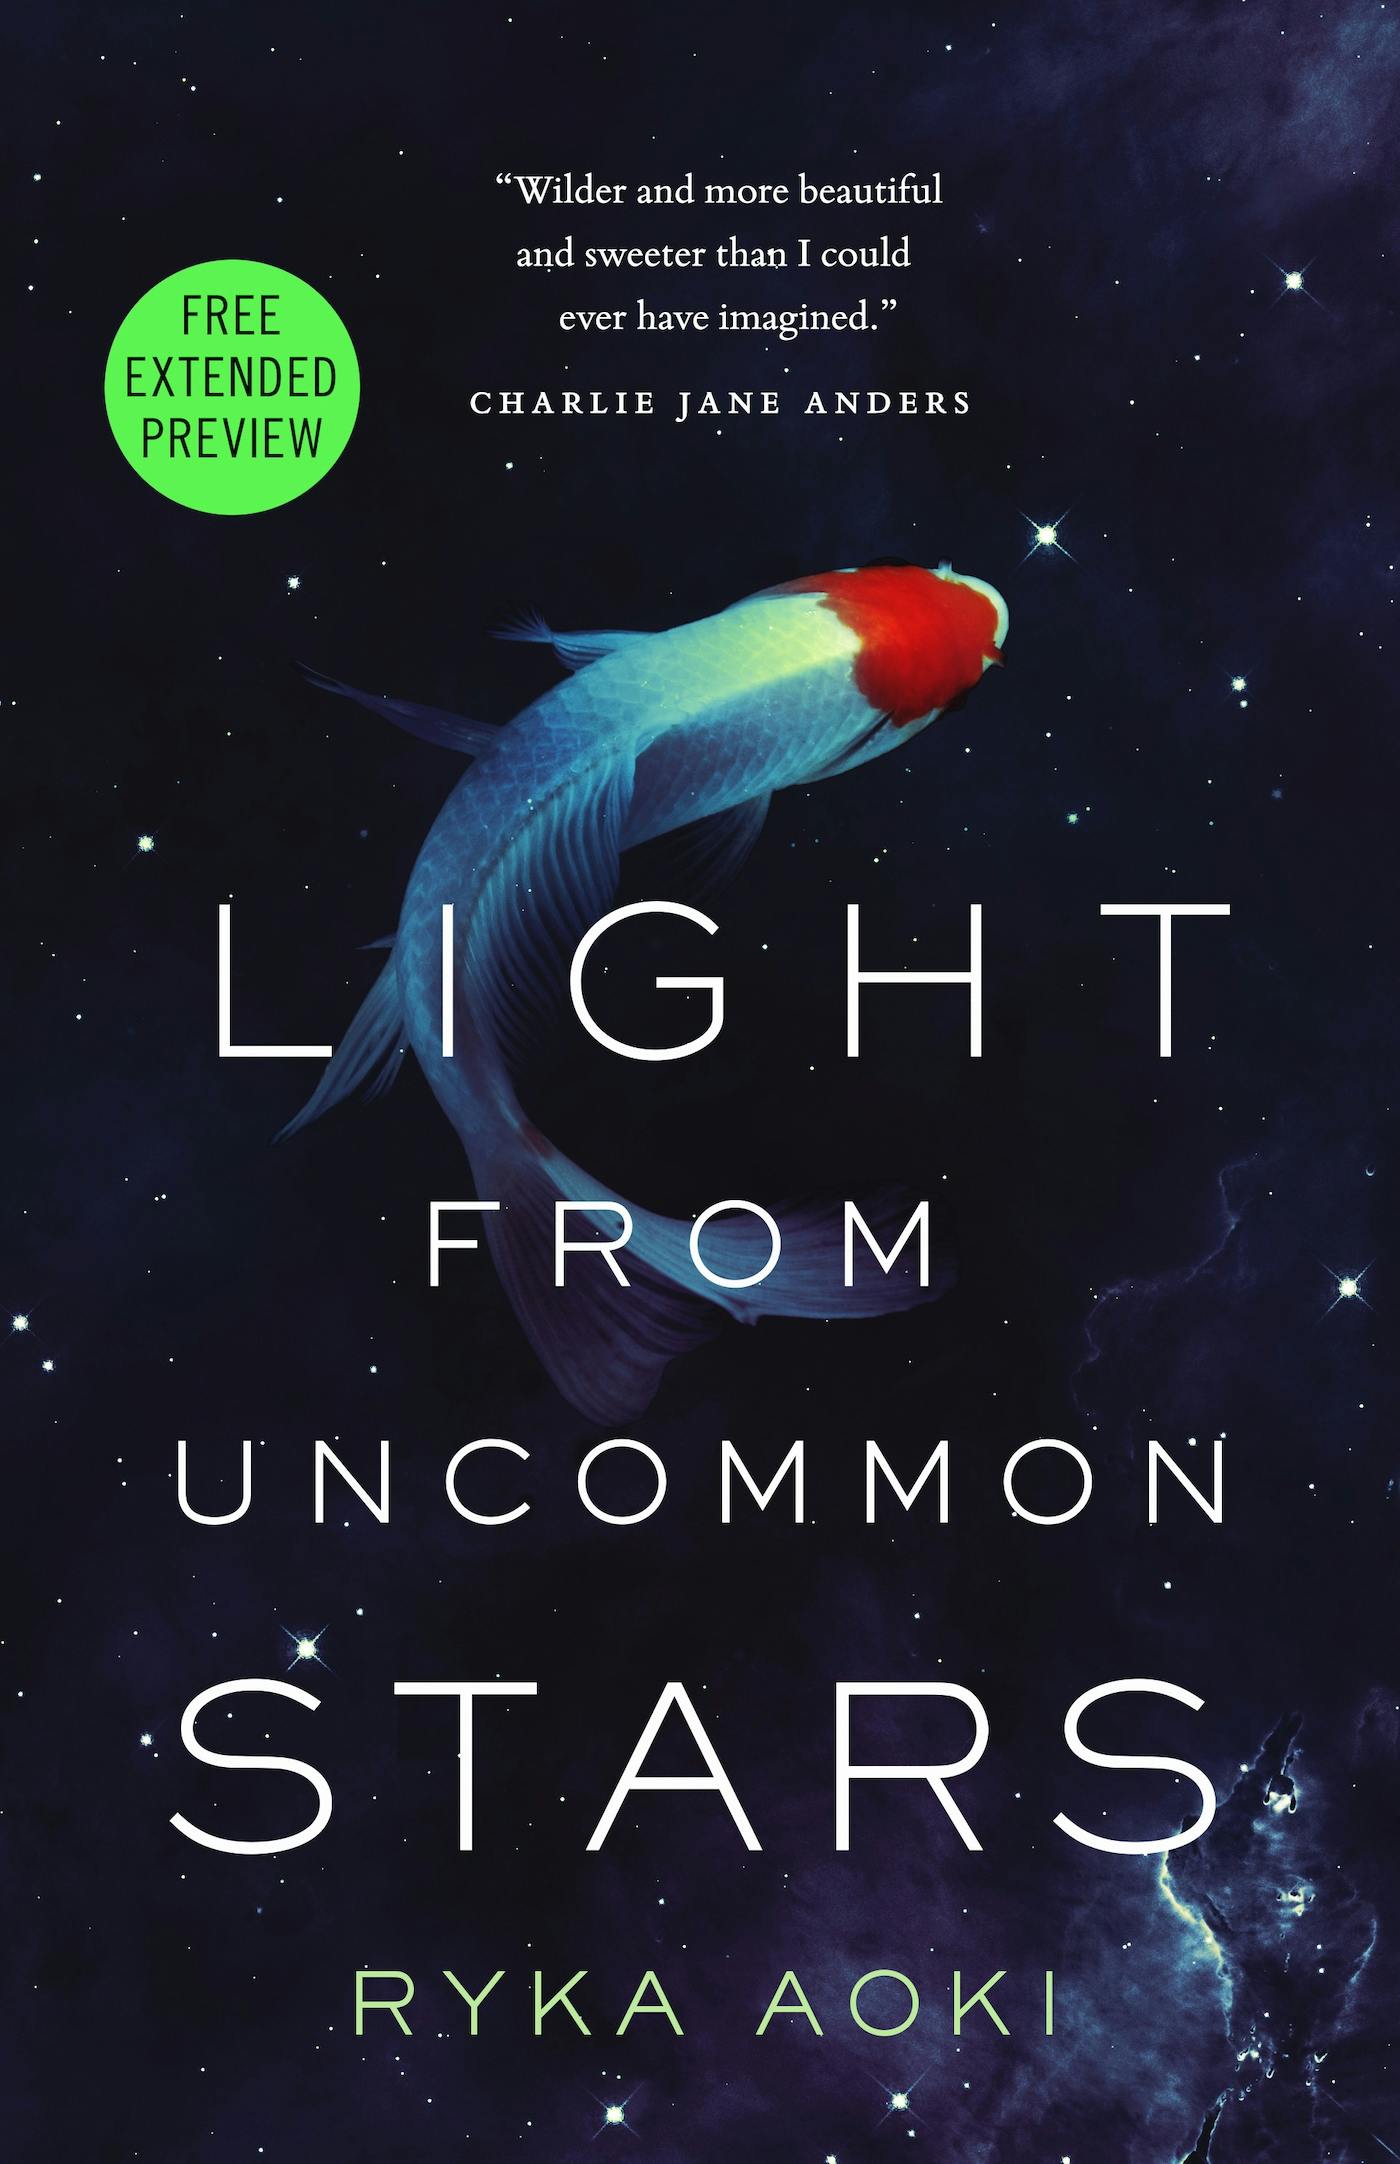 Cover for the book titled as: Light From Uncommon Stars Sneak Peek